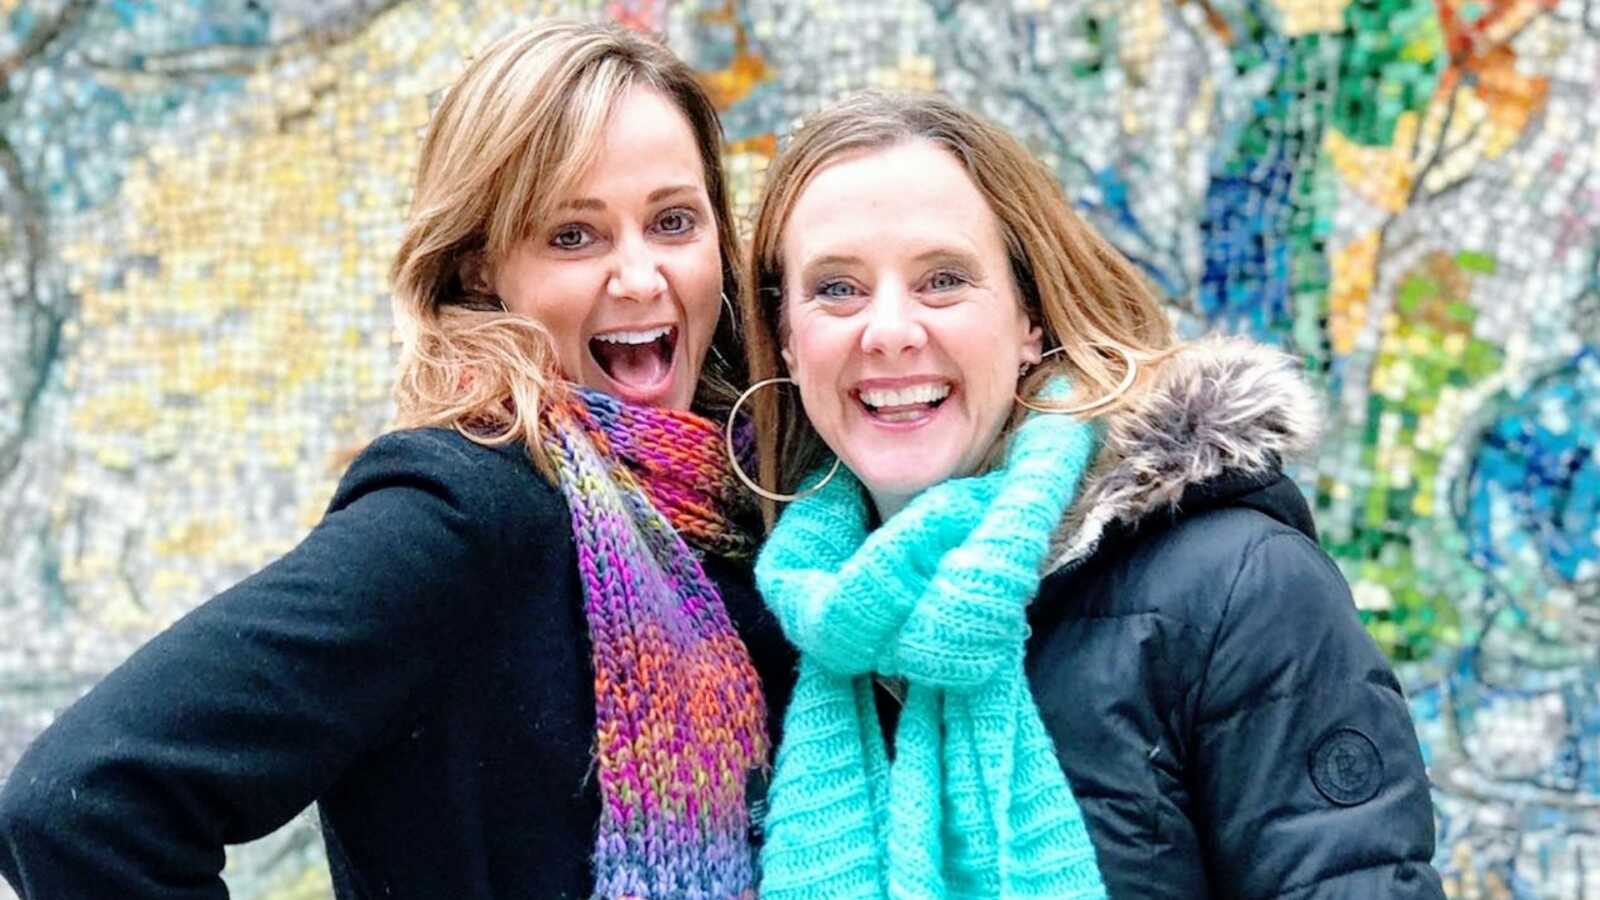 Two mom friends pose for a photo in front of a colorful mural while spending quality time together